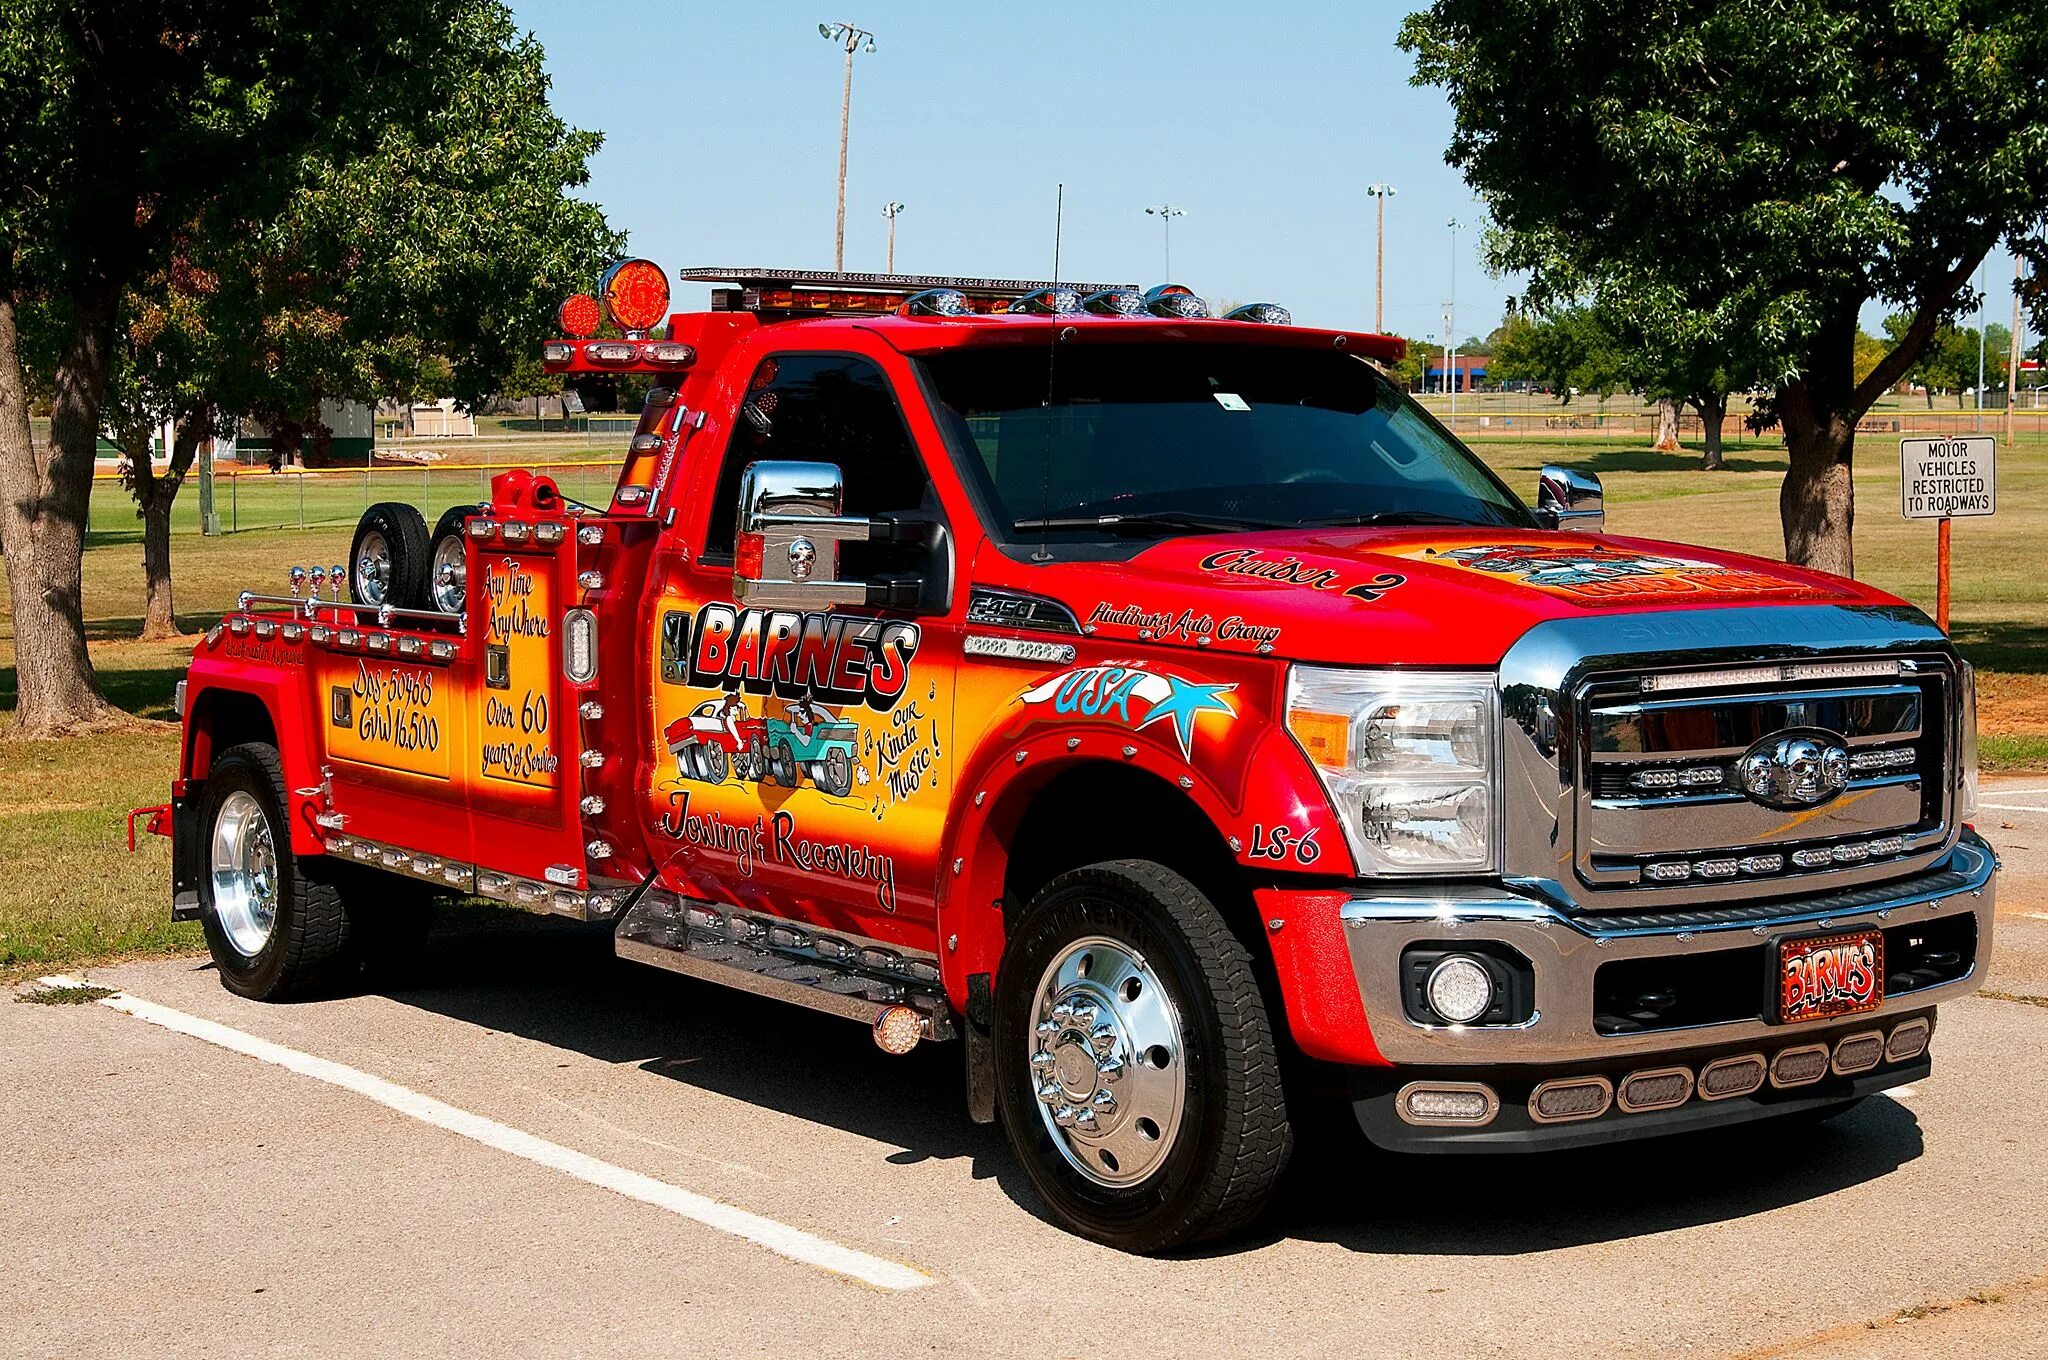 Ford f150 Truck. Ford f350 Tow Truck. Ford f150 эвакуатор. Ford f650 super Duty.